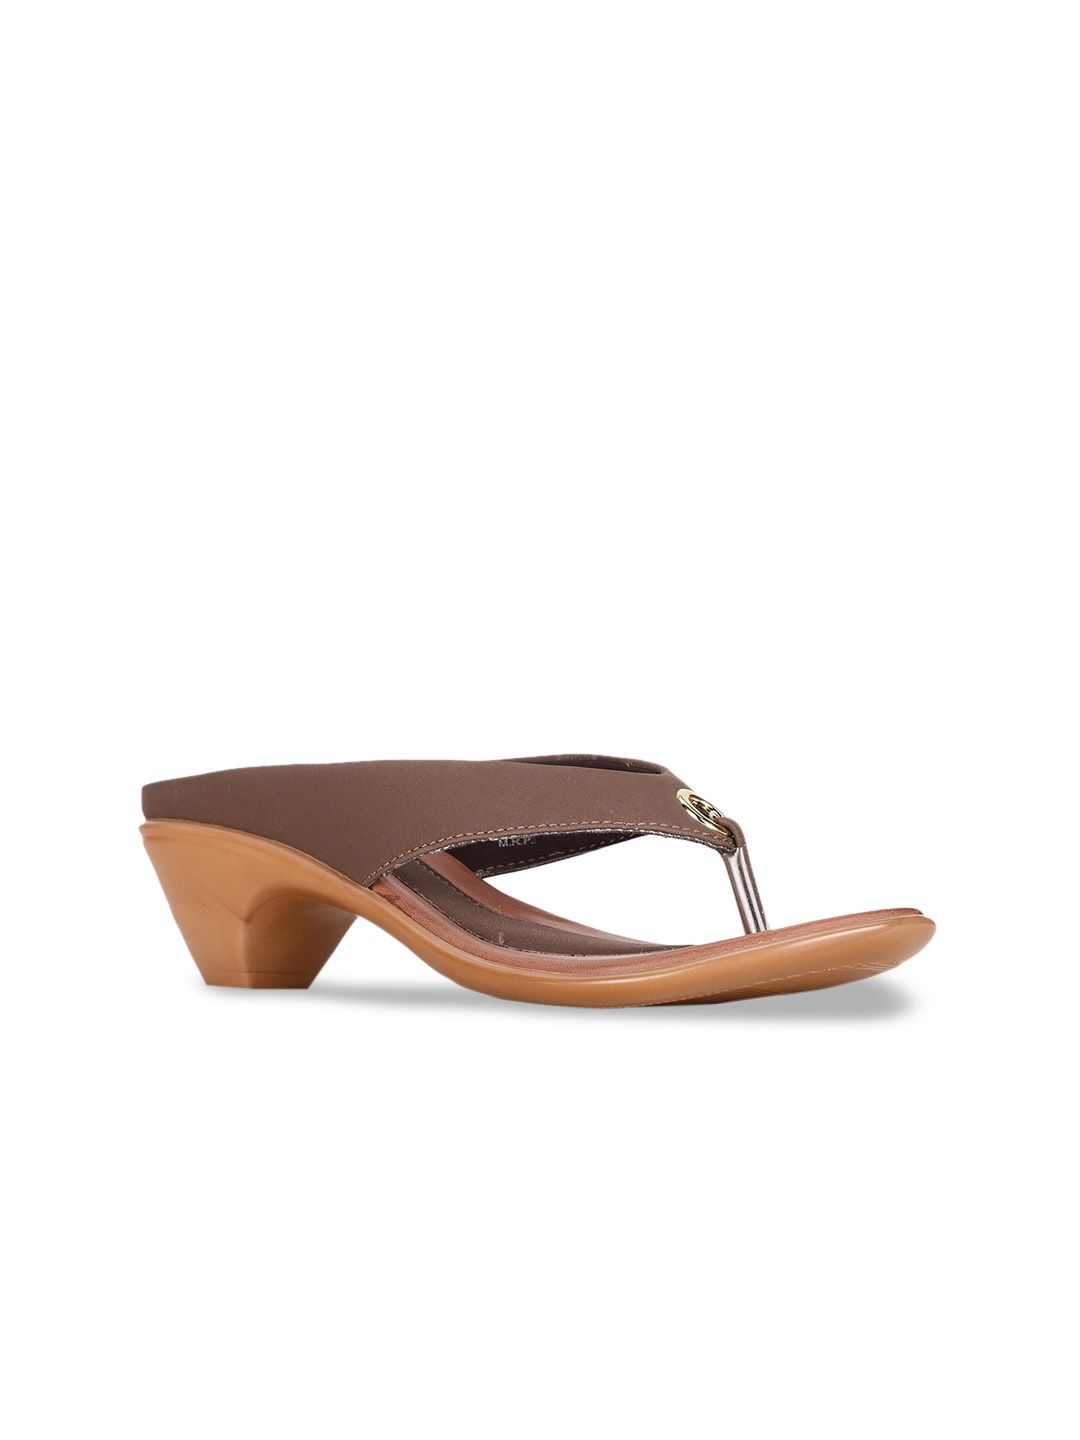 Bata Brown Solid Synthetic Block Sandals Price in India